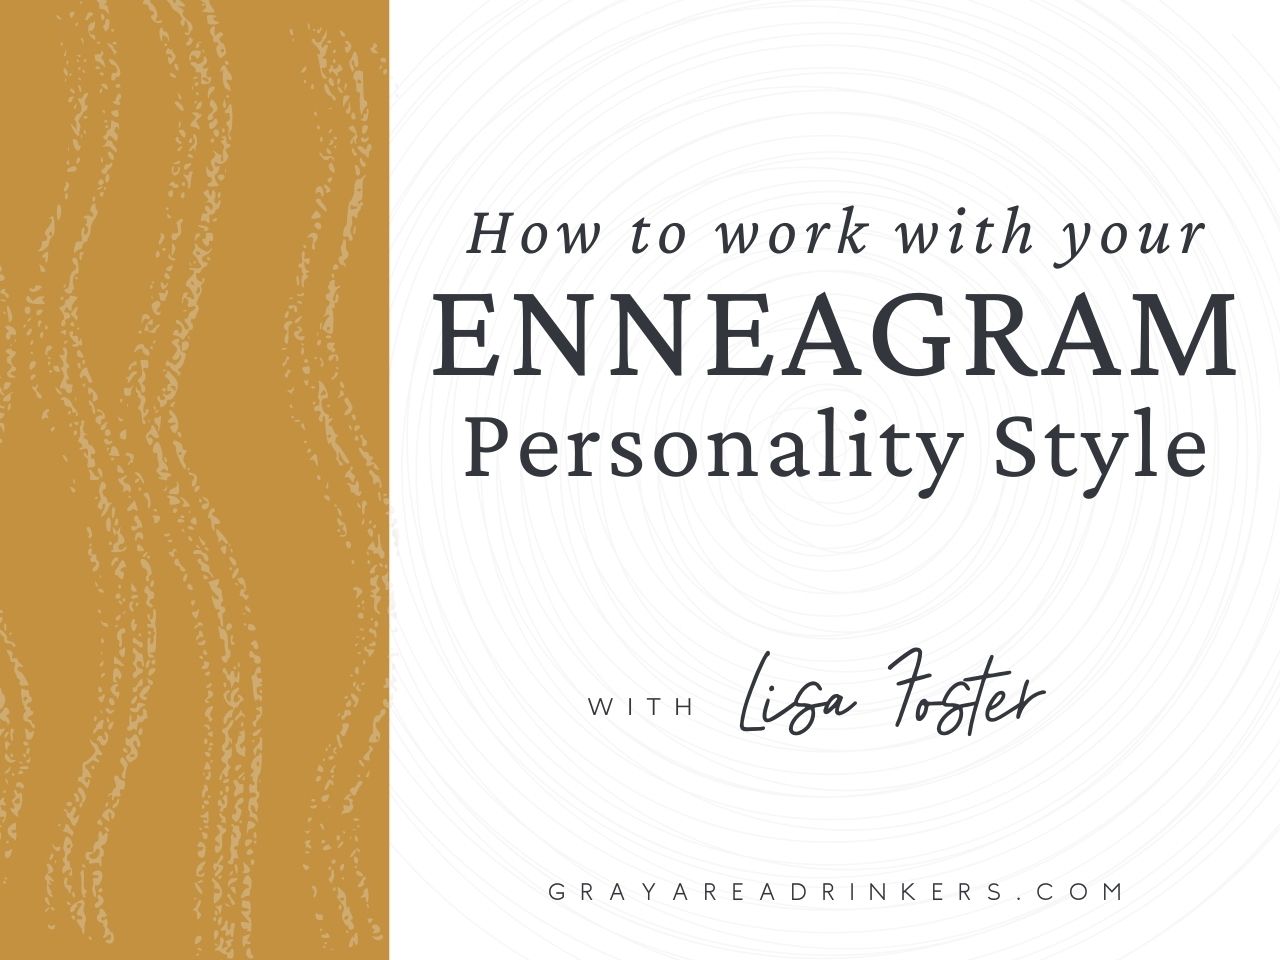 Masterclass - How to Work With Your Enneagram Personality Style